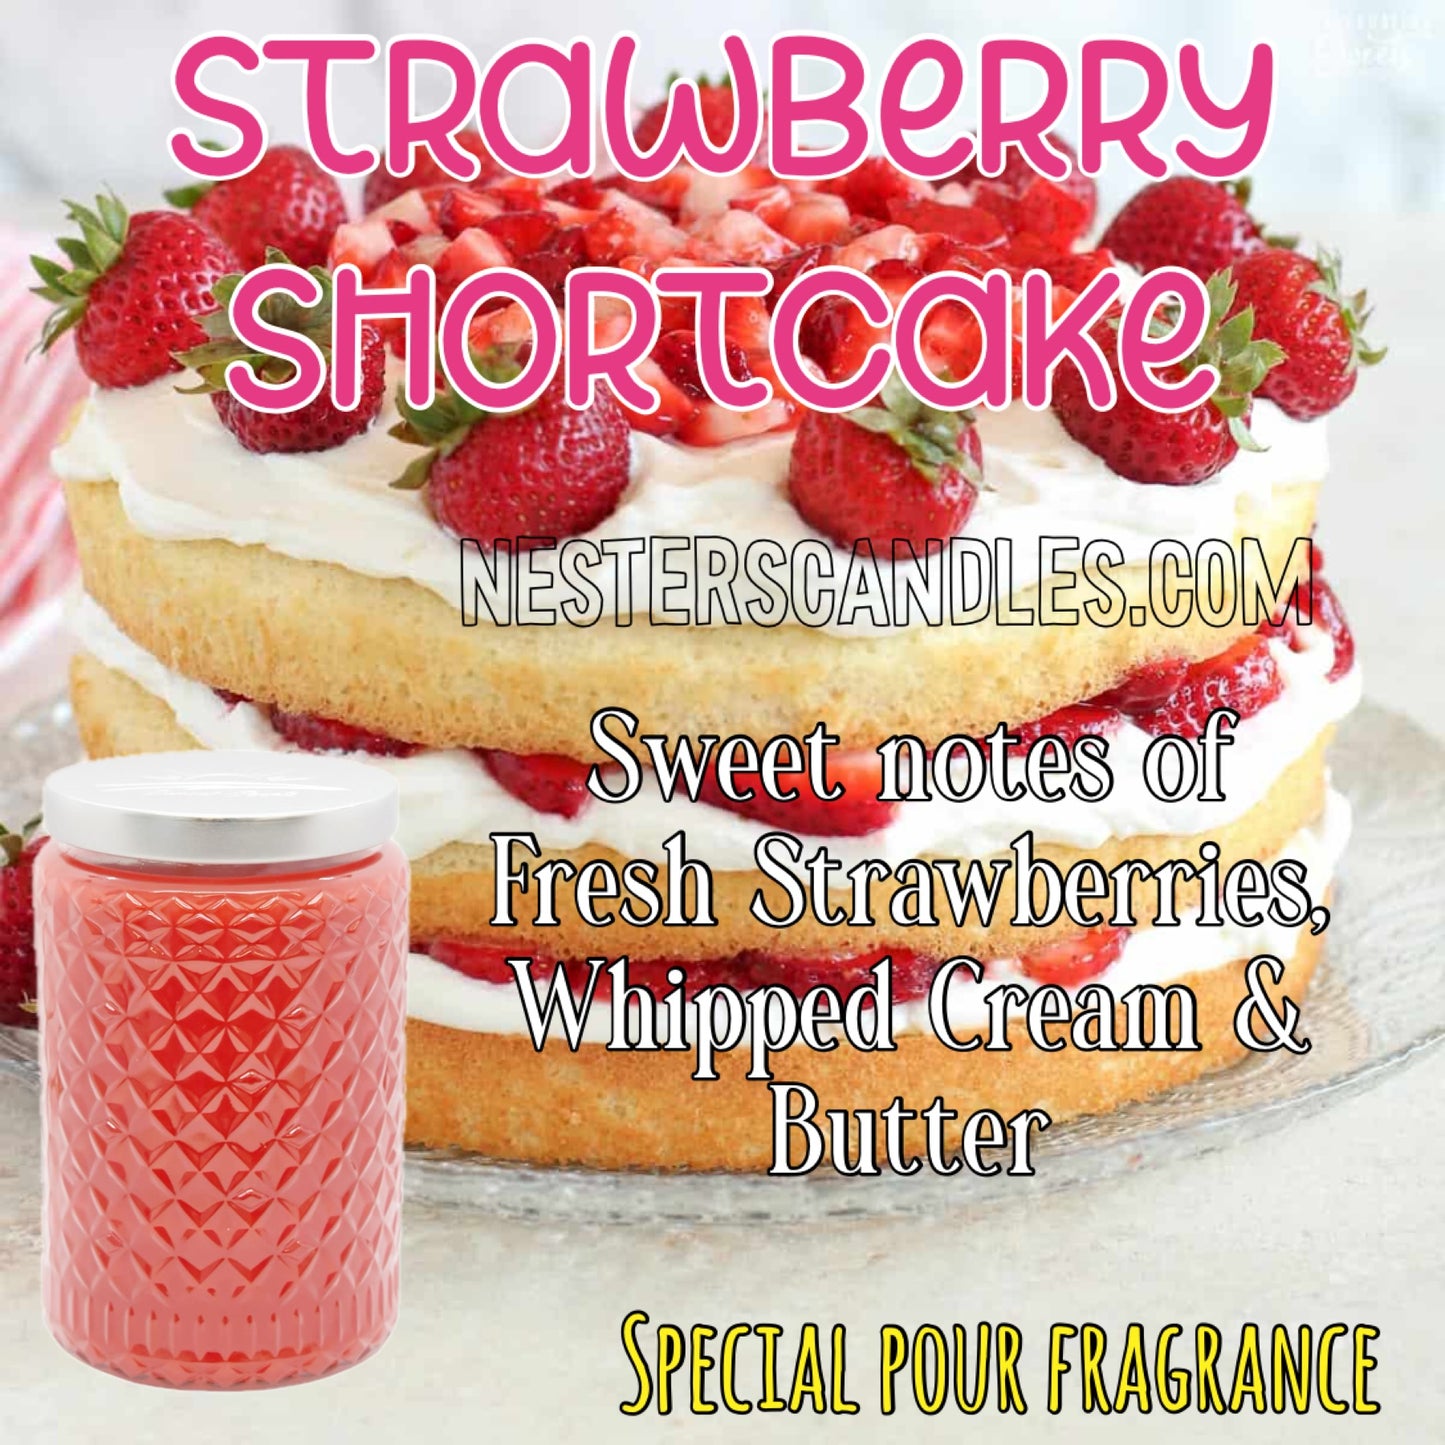 Strawberry Shortcake - special pour/limited edition